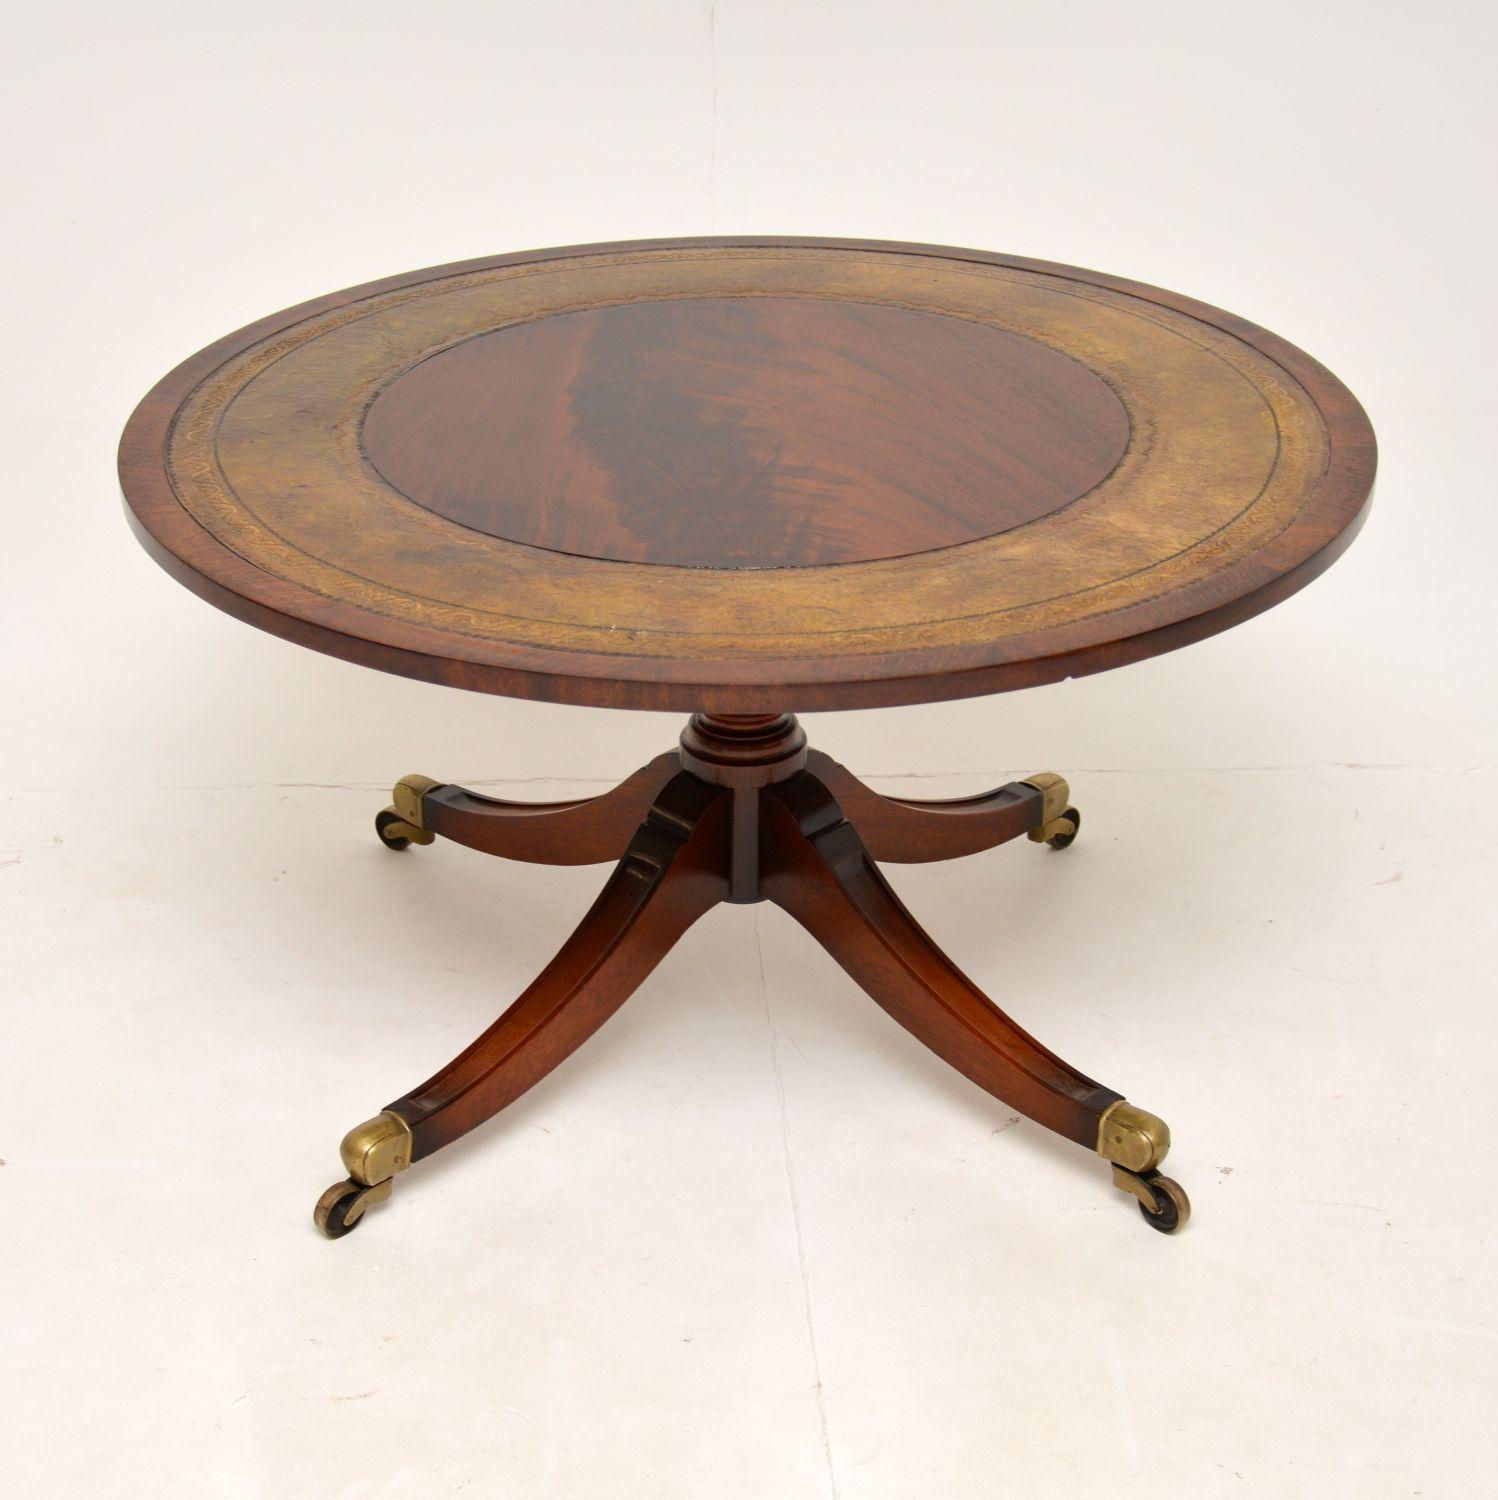 A fantastic antique coffee table in the Regency style. This was made in England & dates from around the 1930’s.

The quality is amazing, this is so well made and is a great size. The circular top has a flame wood centre and edges, with the